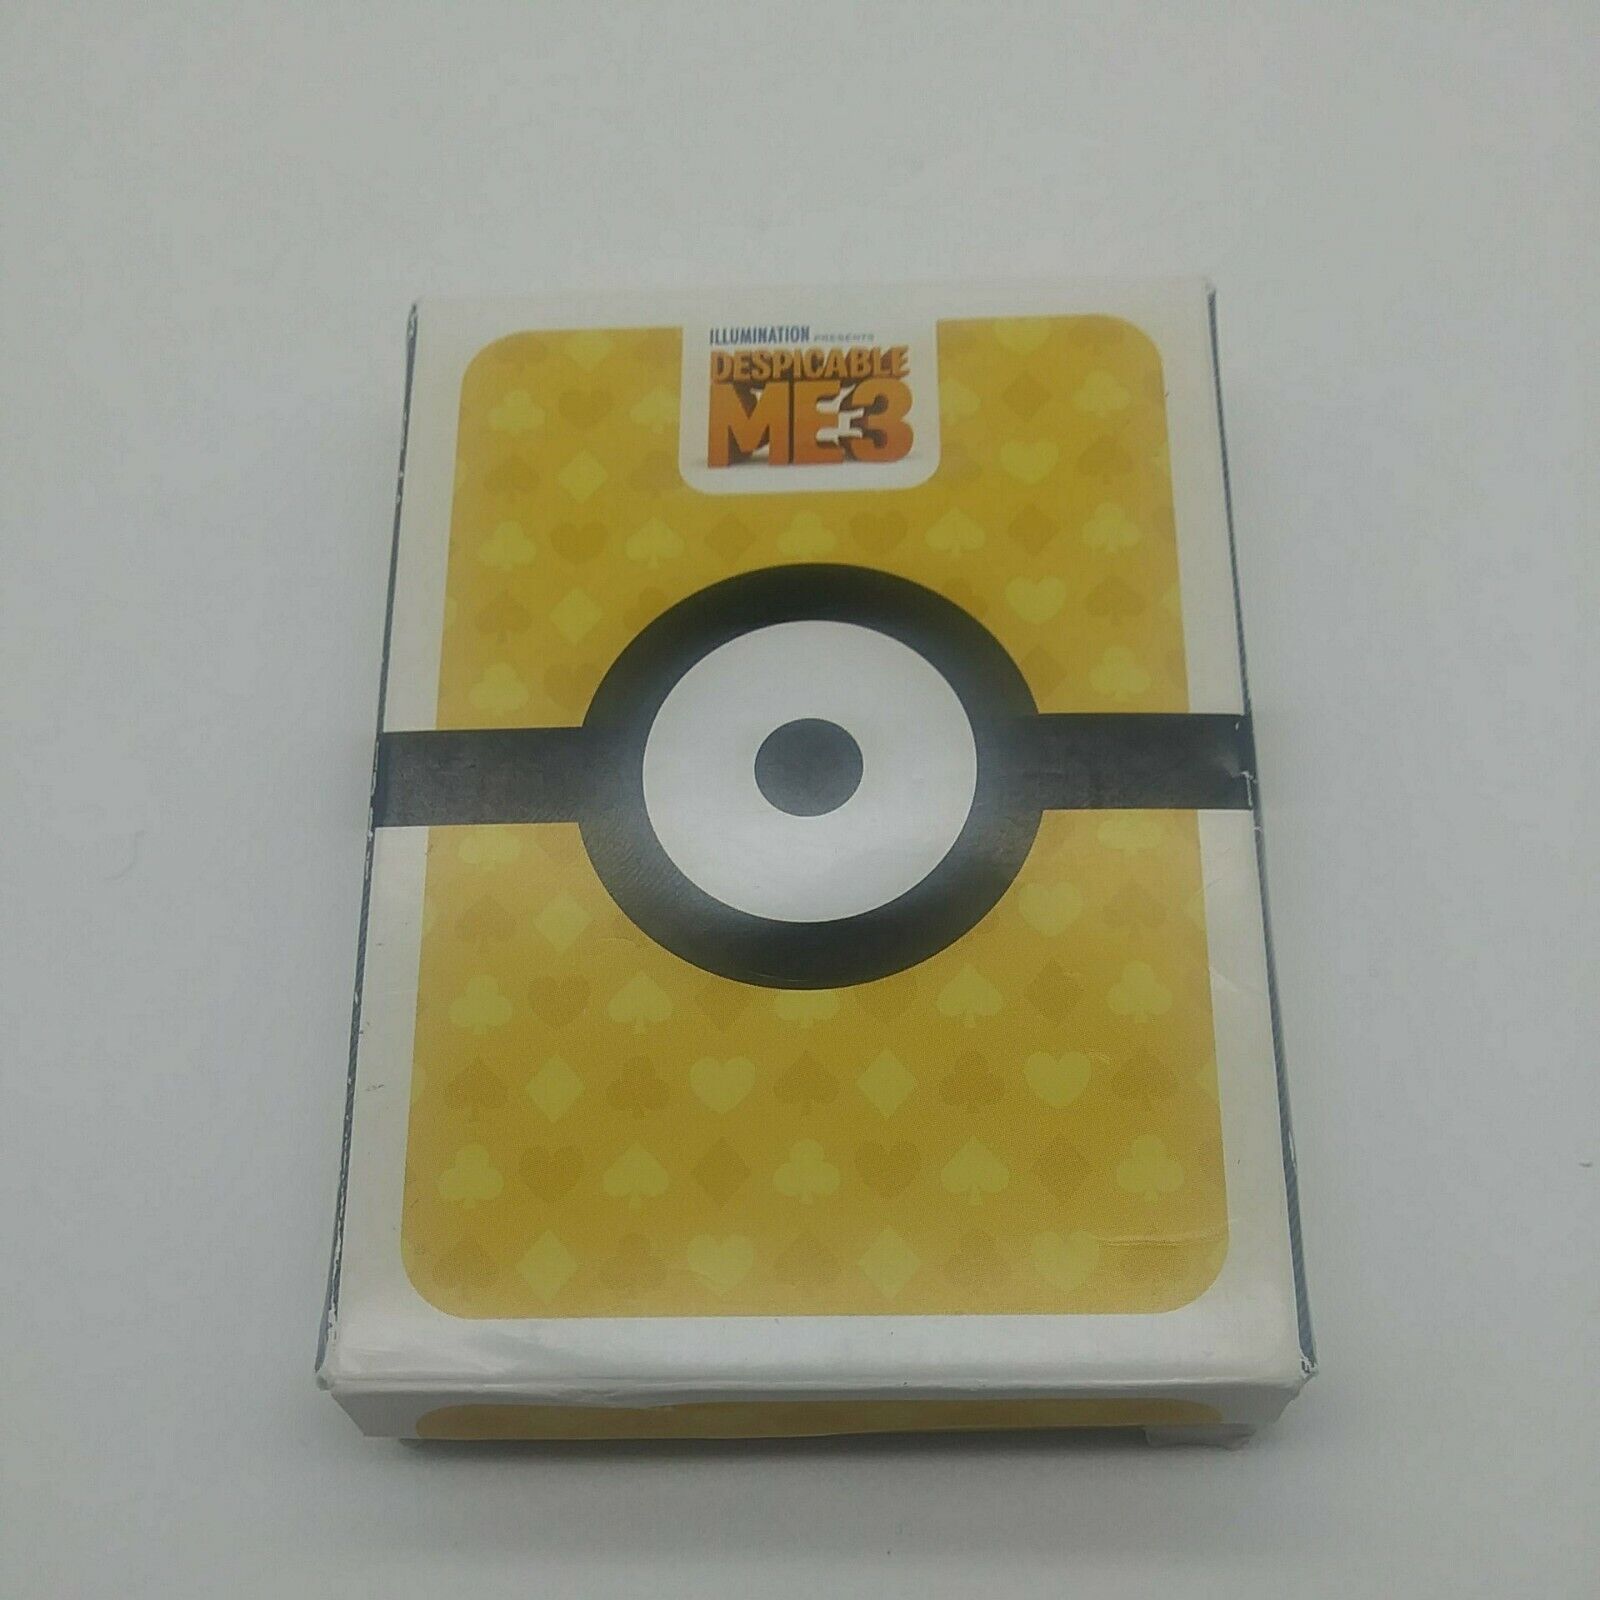 McDonald\'s Despicable Me 3 Deck of Playing Cards 